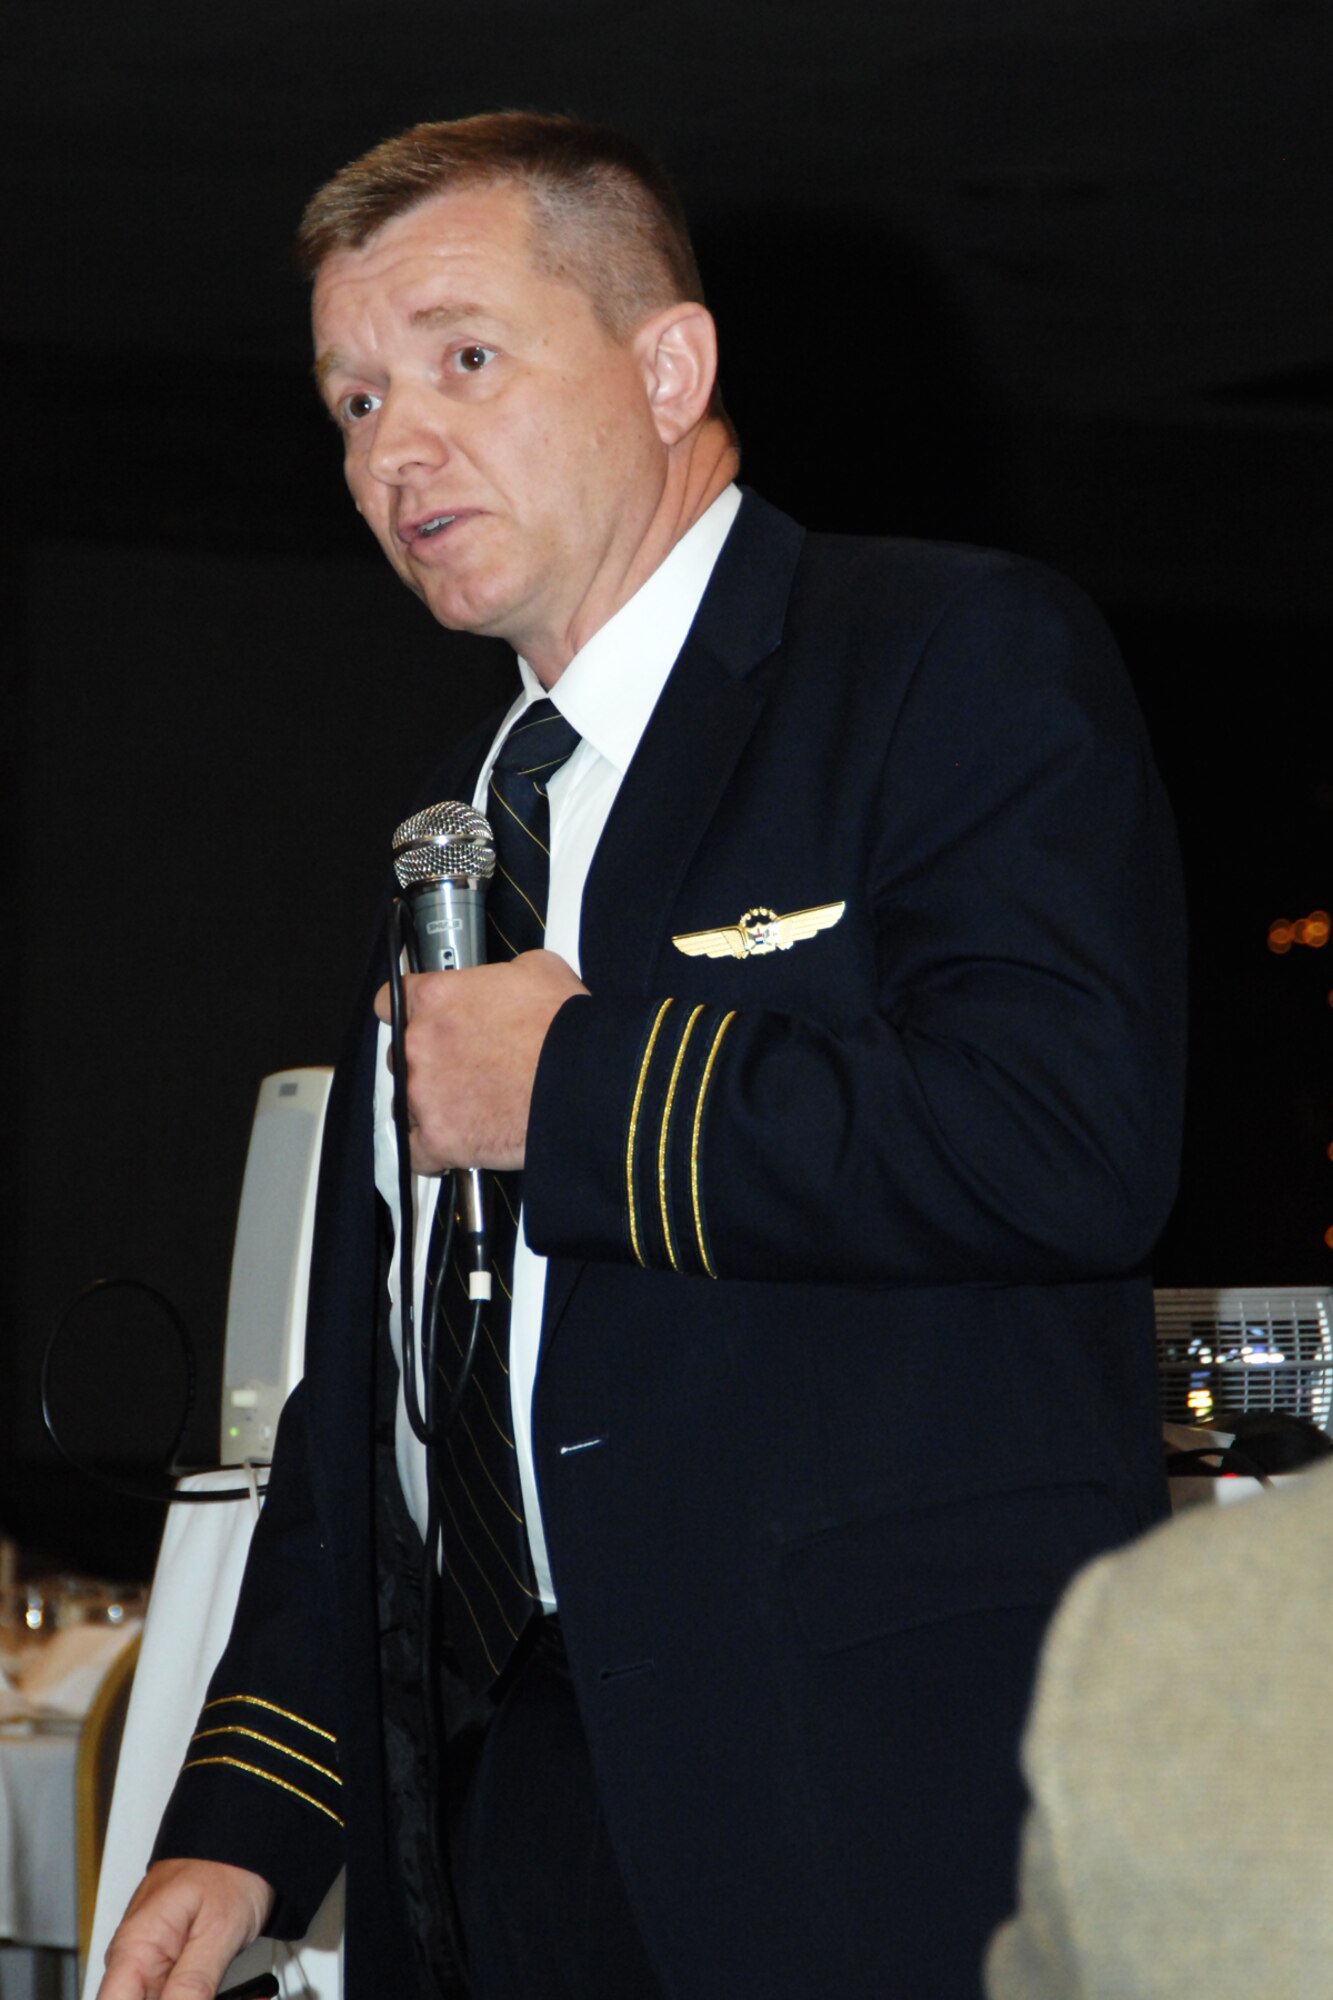 Michigan Air National Guard Lt, Col. Rolf Mammen wears his United Airlines pilot uniform as he recalls the events of Sept. 11, 2001, during a meeting of the Selfridge Base Community Council near Selfridge Air National Guard Base, June 21, 2001. Mammen, who is also a pilot with the 127th Wing, was flying in a United airliner, bound for New York, on the morning of Sept. 11. (USAF photo by Rachel Barton, 127th Wing Public Affairs)